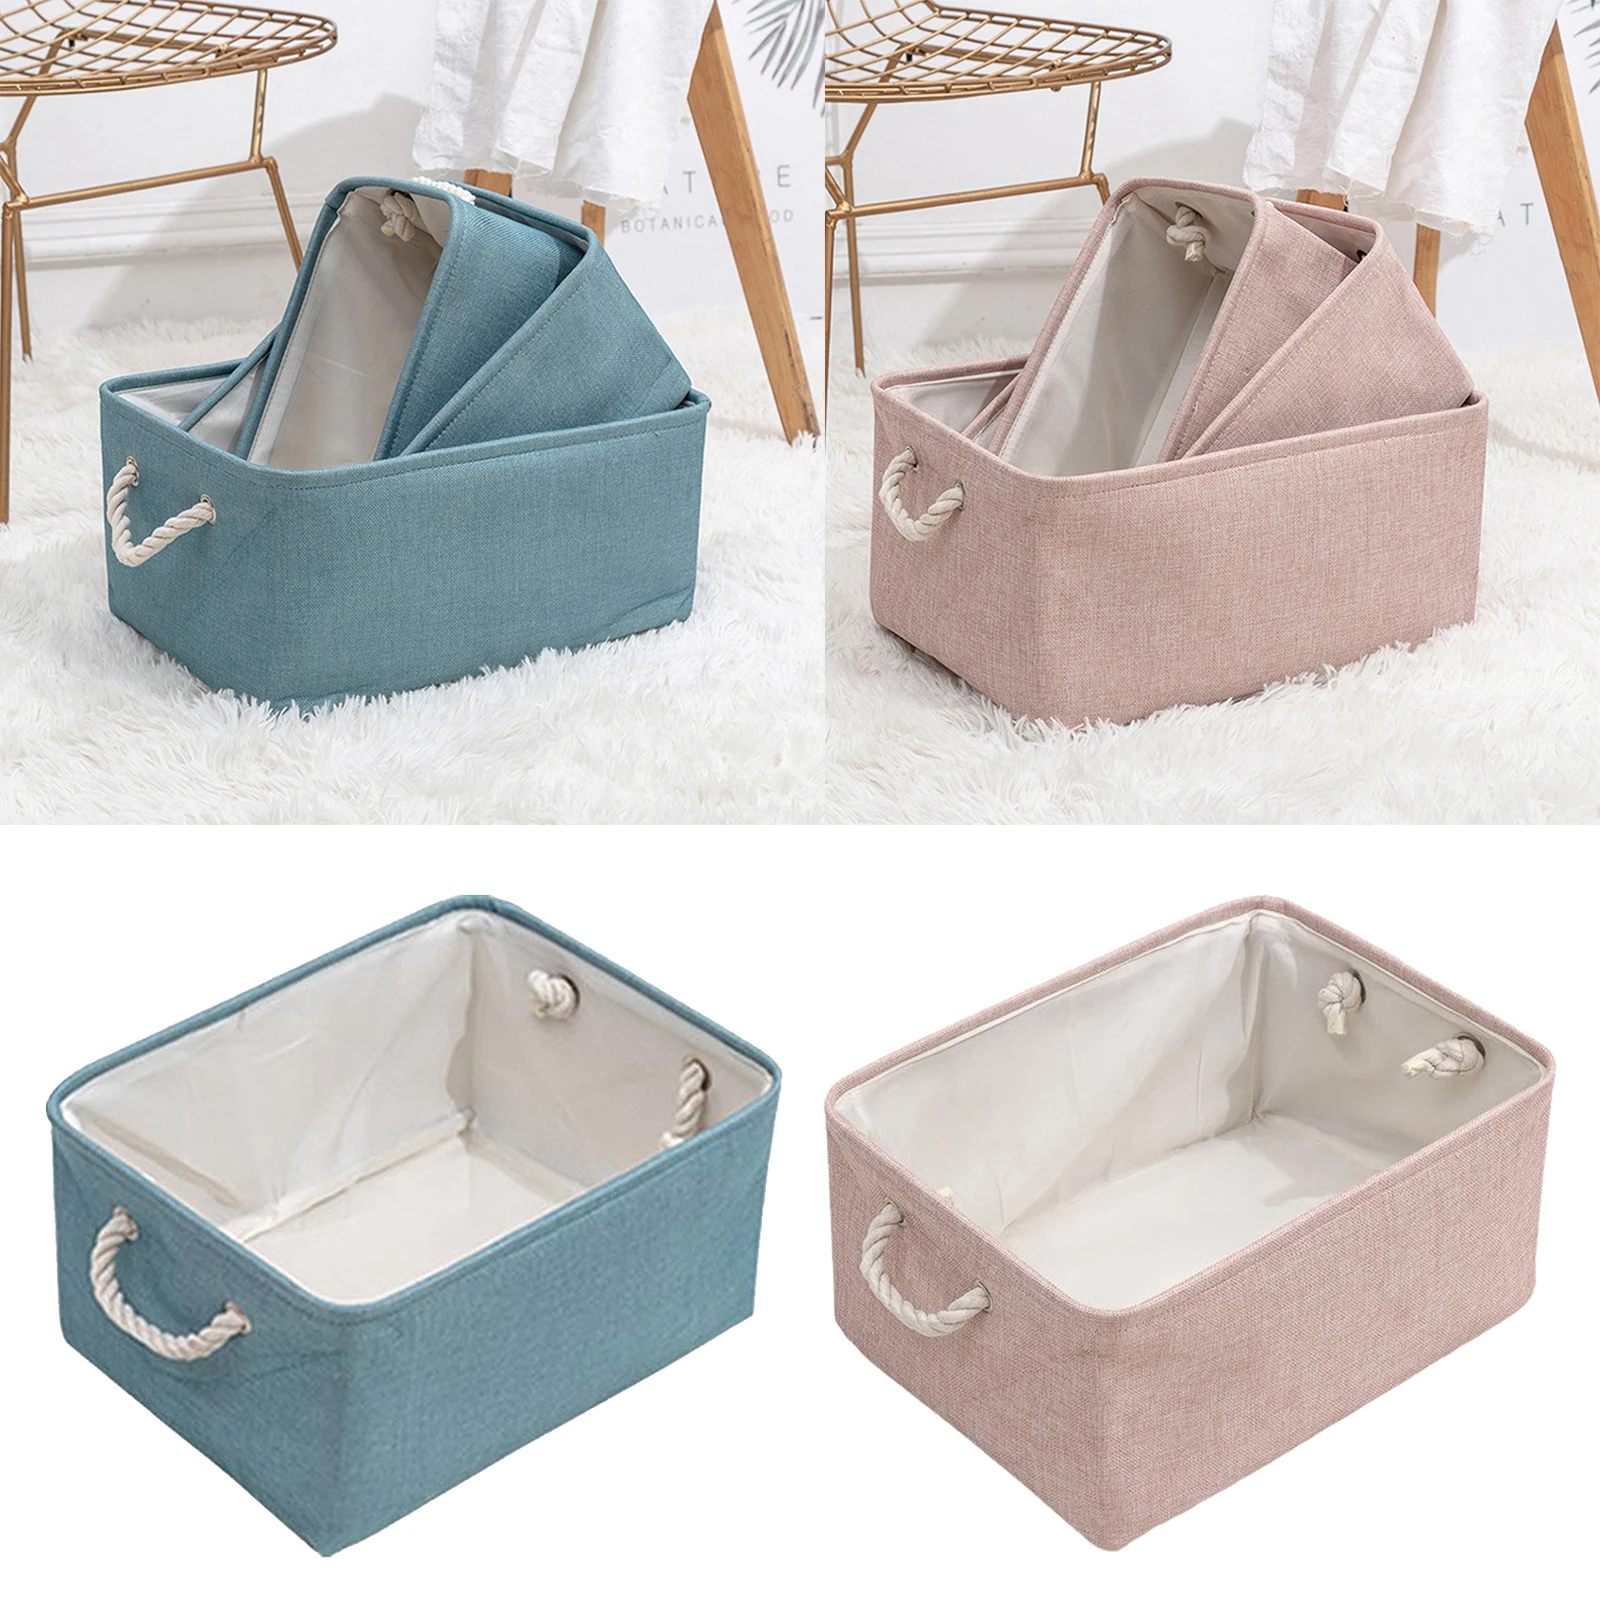 Collapsible Fabric Storage Basket Baby Toy Organizer Linen Cloth with Handle for Home